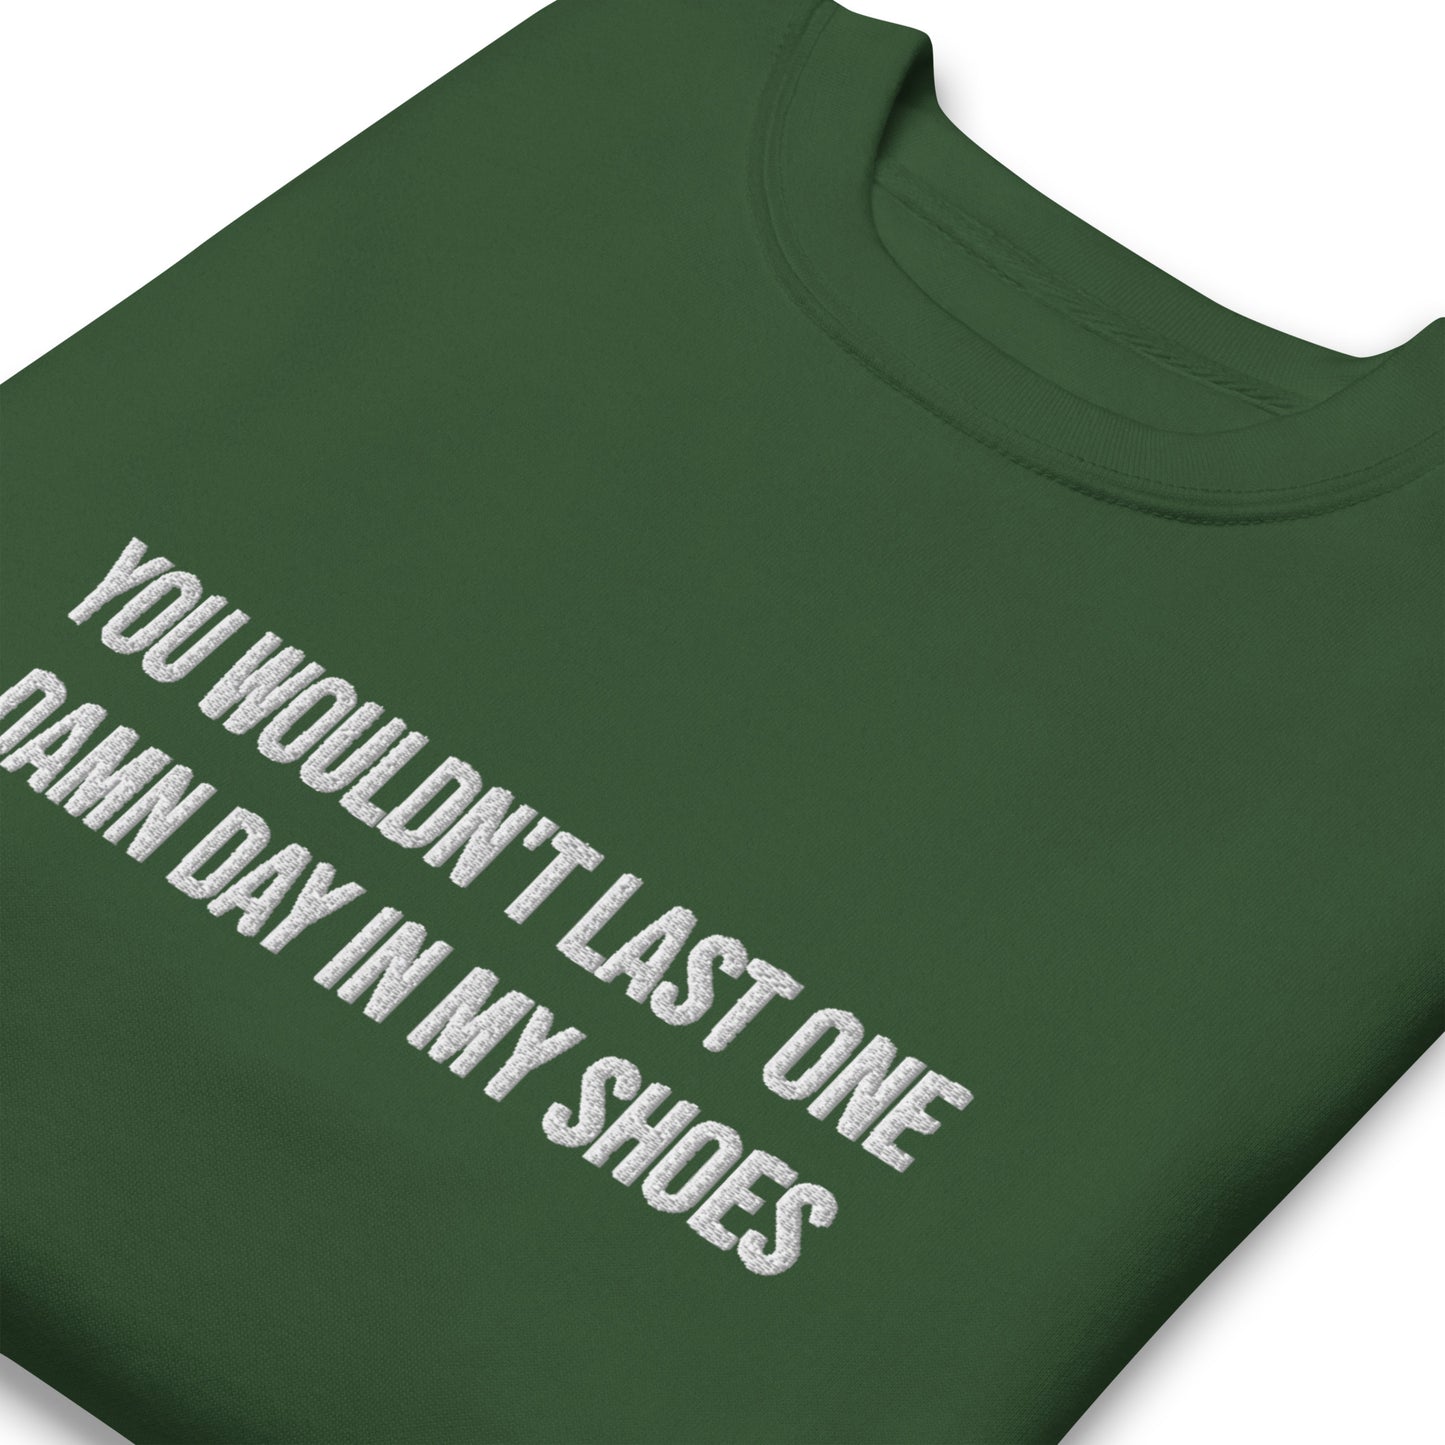 You Wouldn't Last One Damn Day In My Shoes / Warrior Embroidered Unisex Sweatshirt